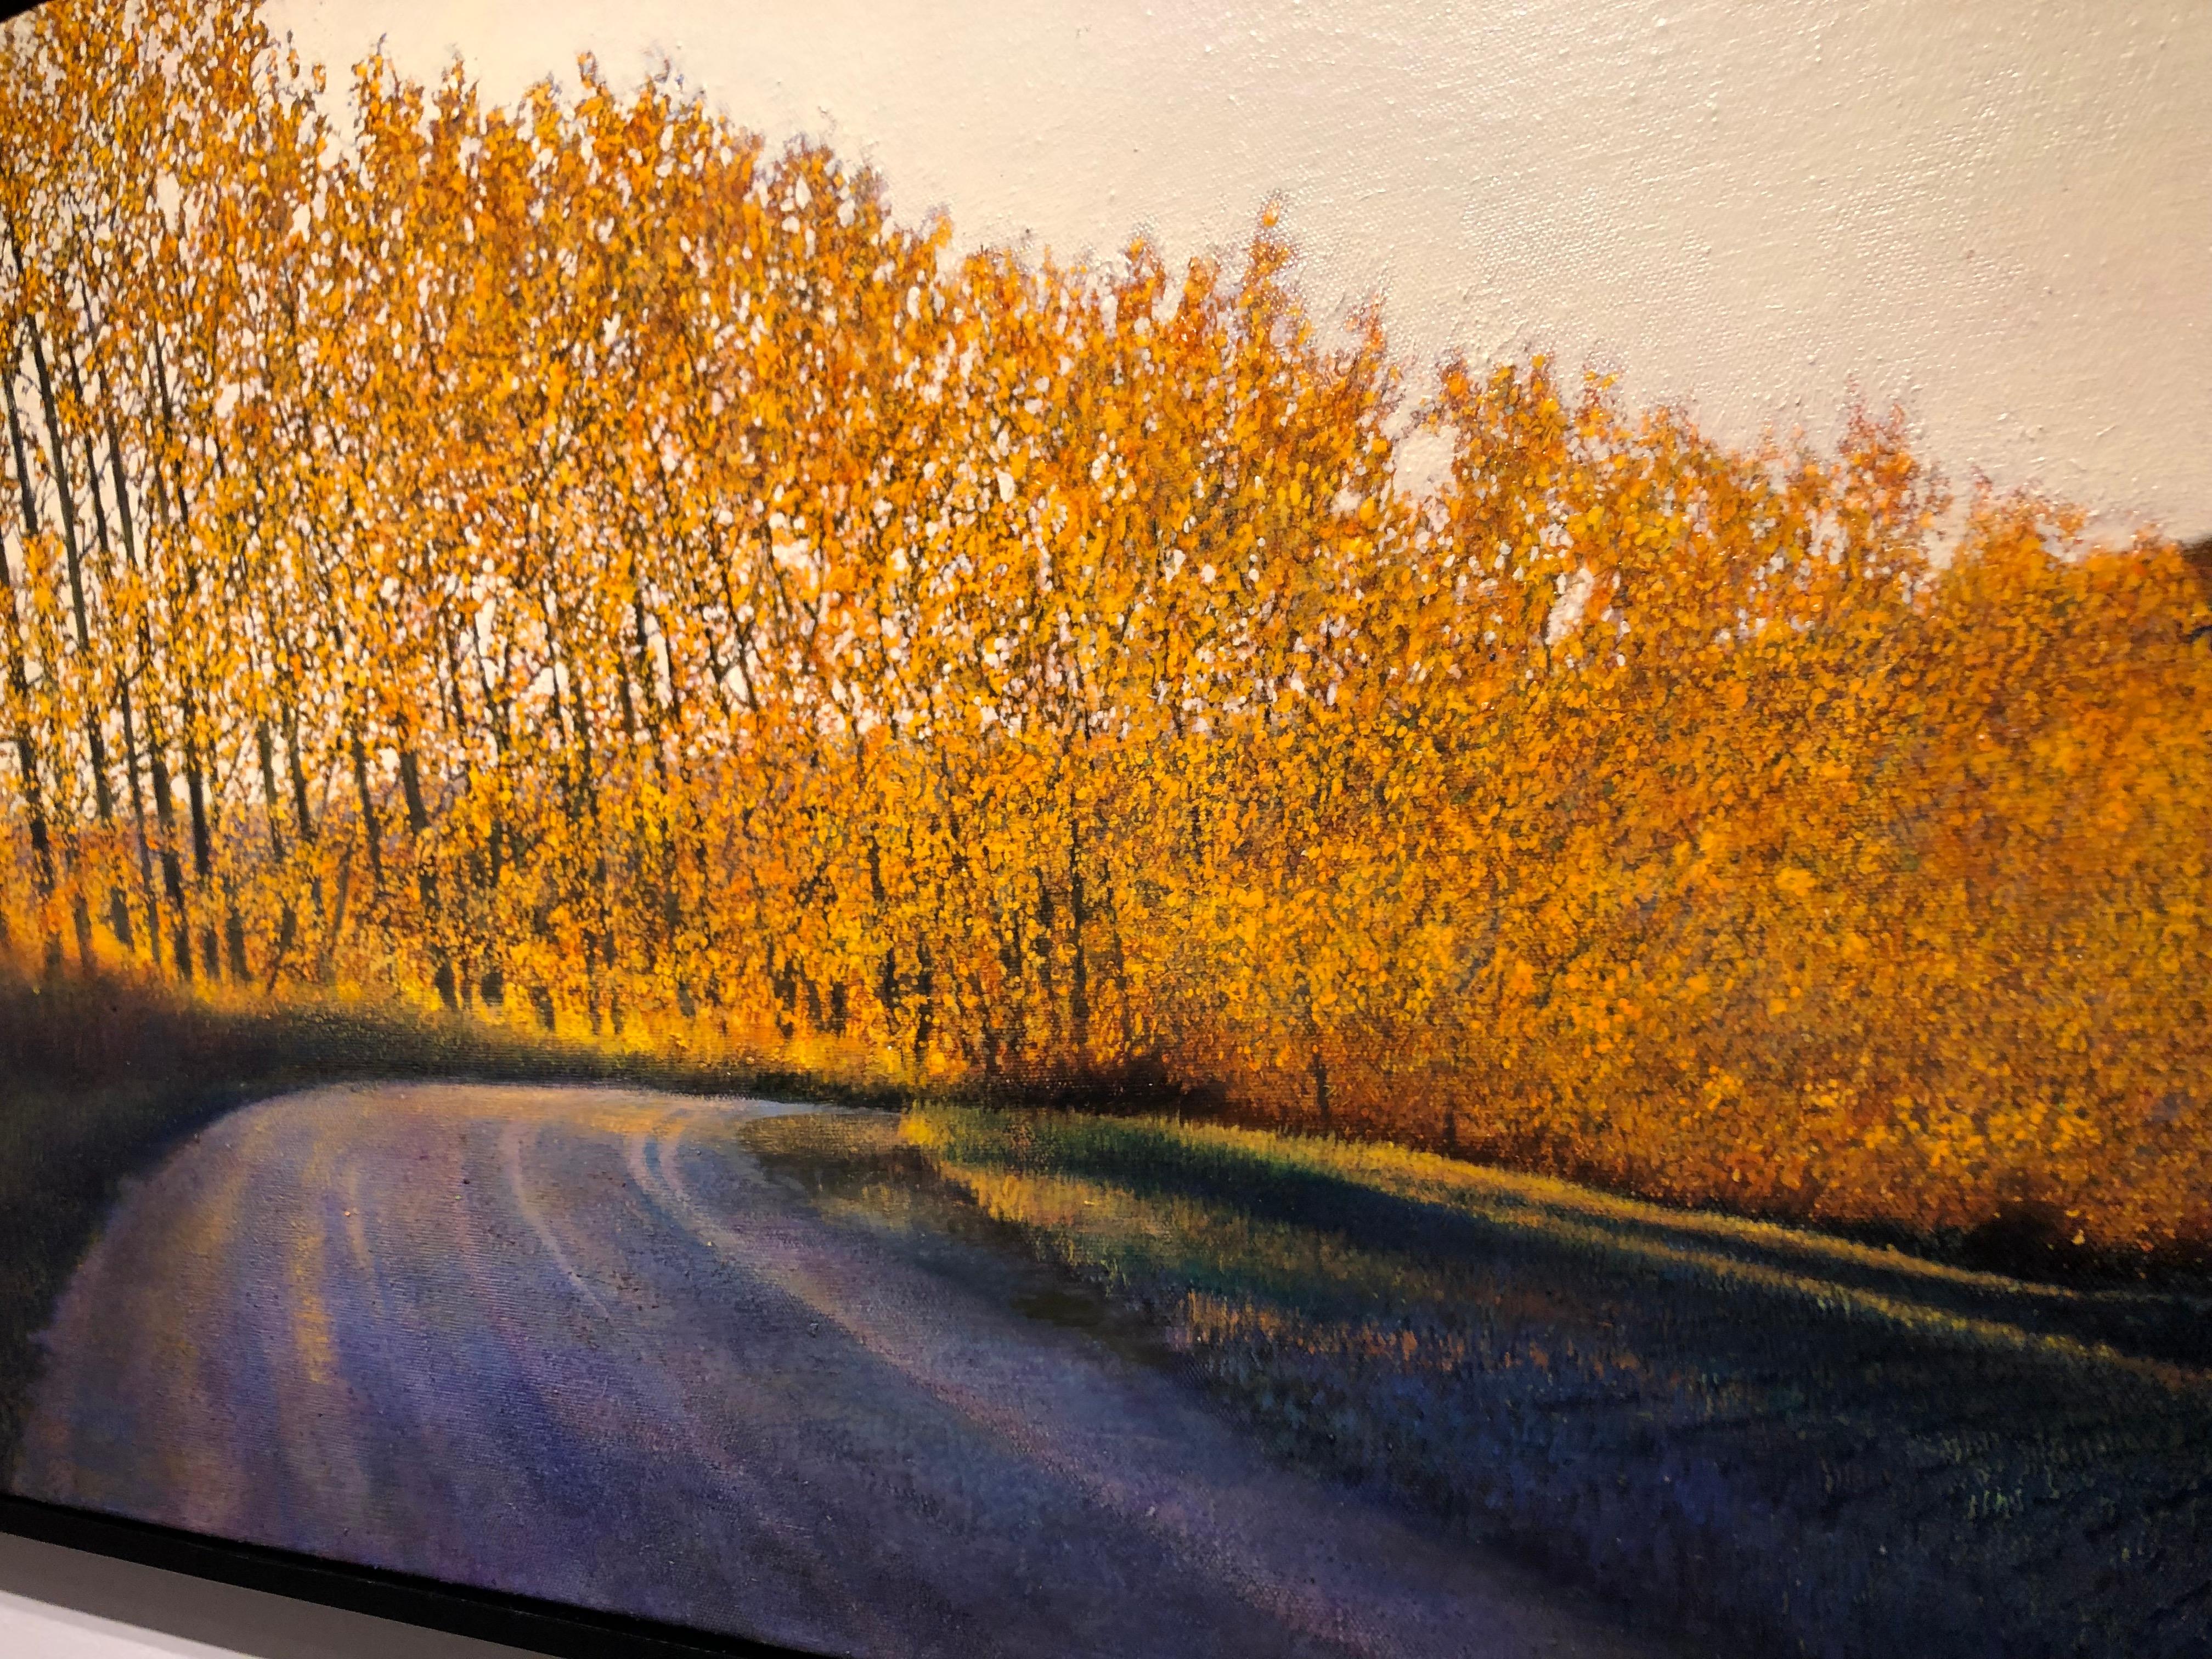 The Color of Home, Original Oil Painting, Glowing Autumn Foliage on Country Road 10